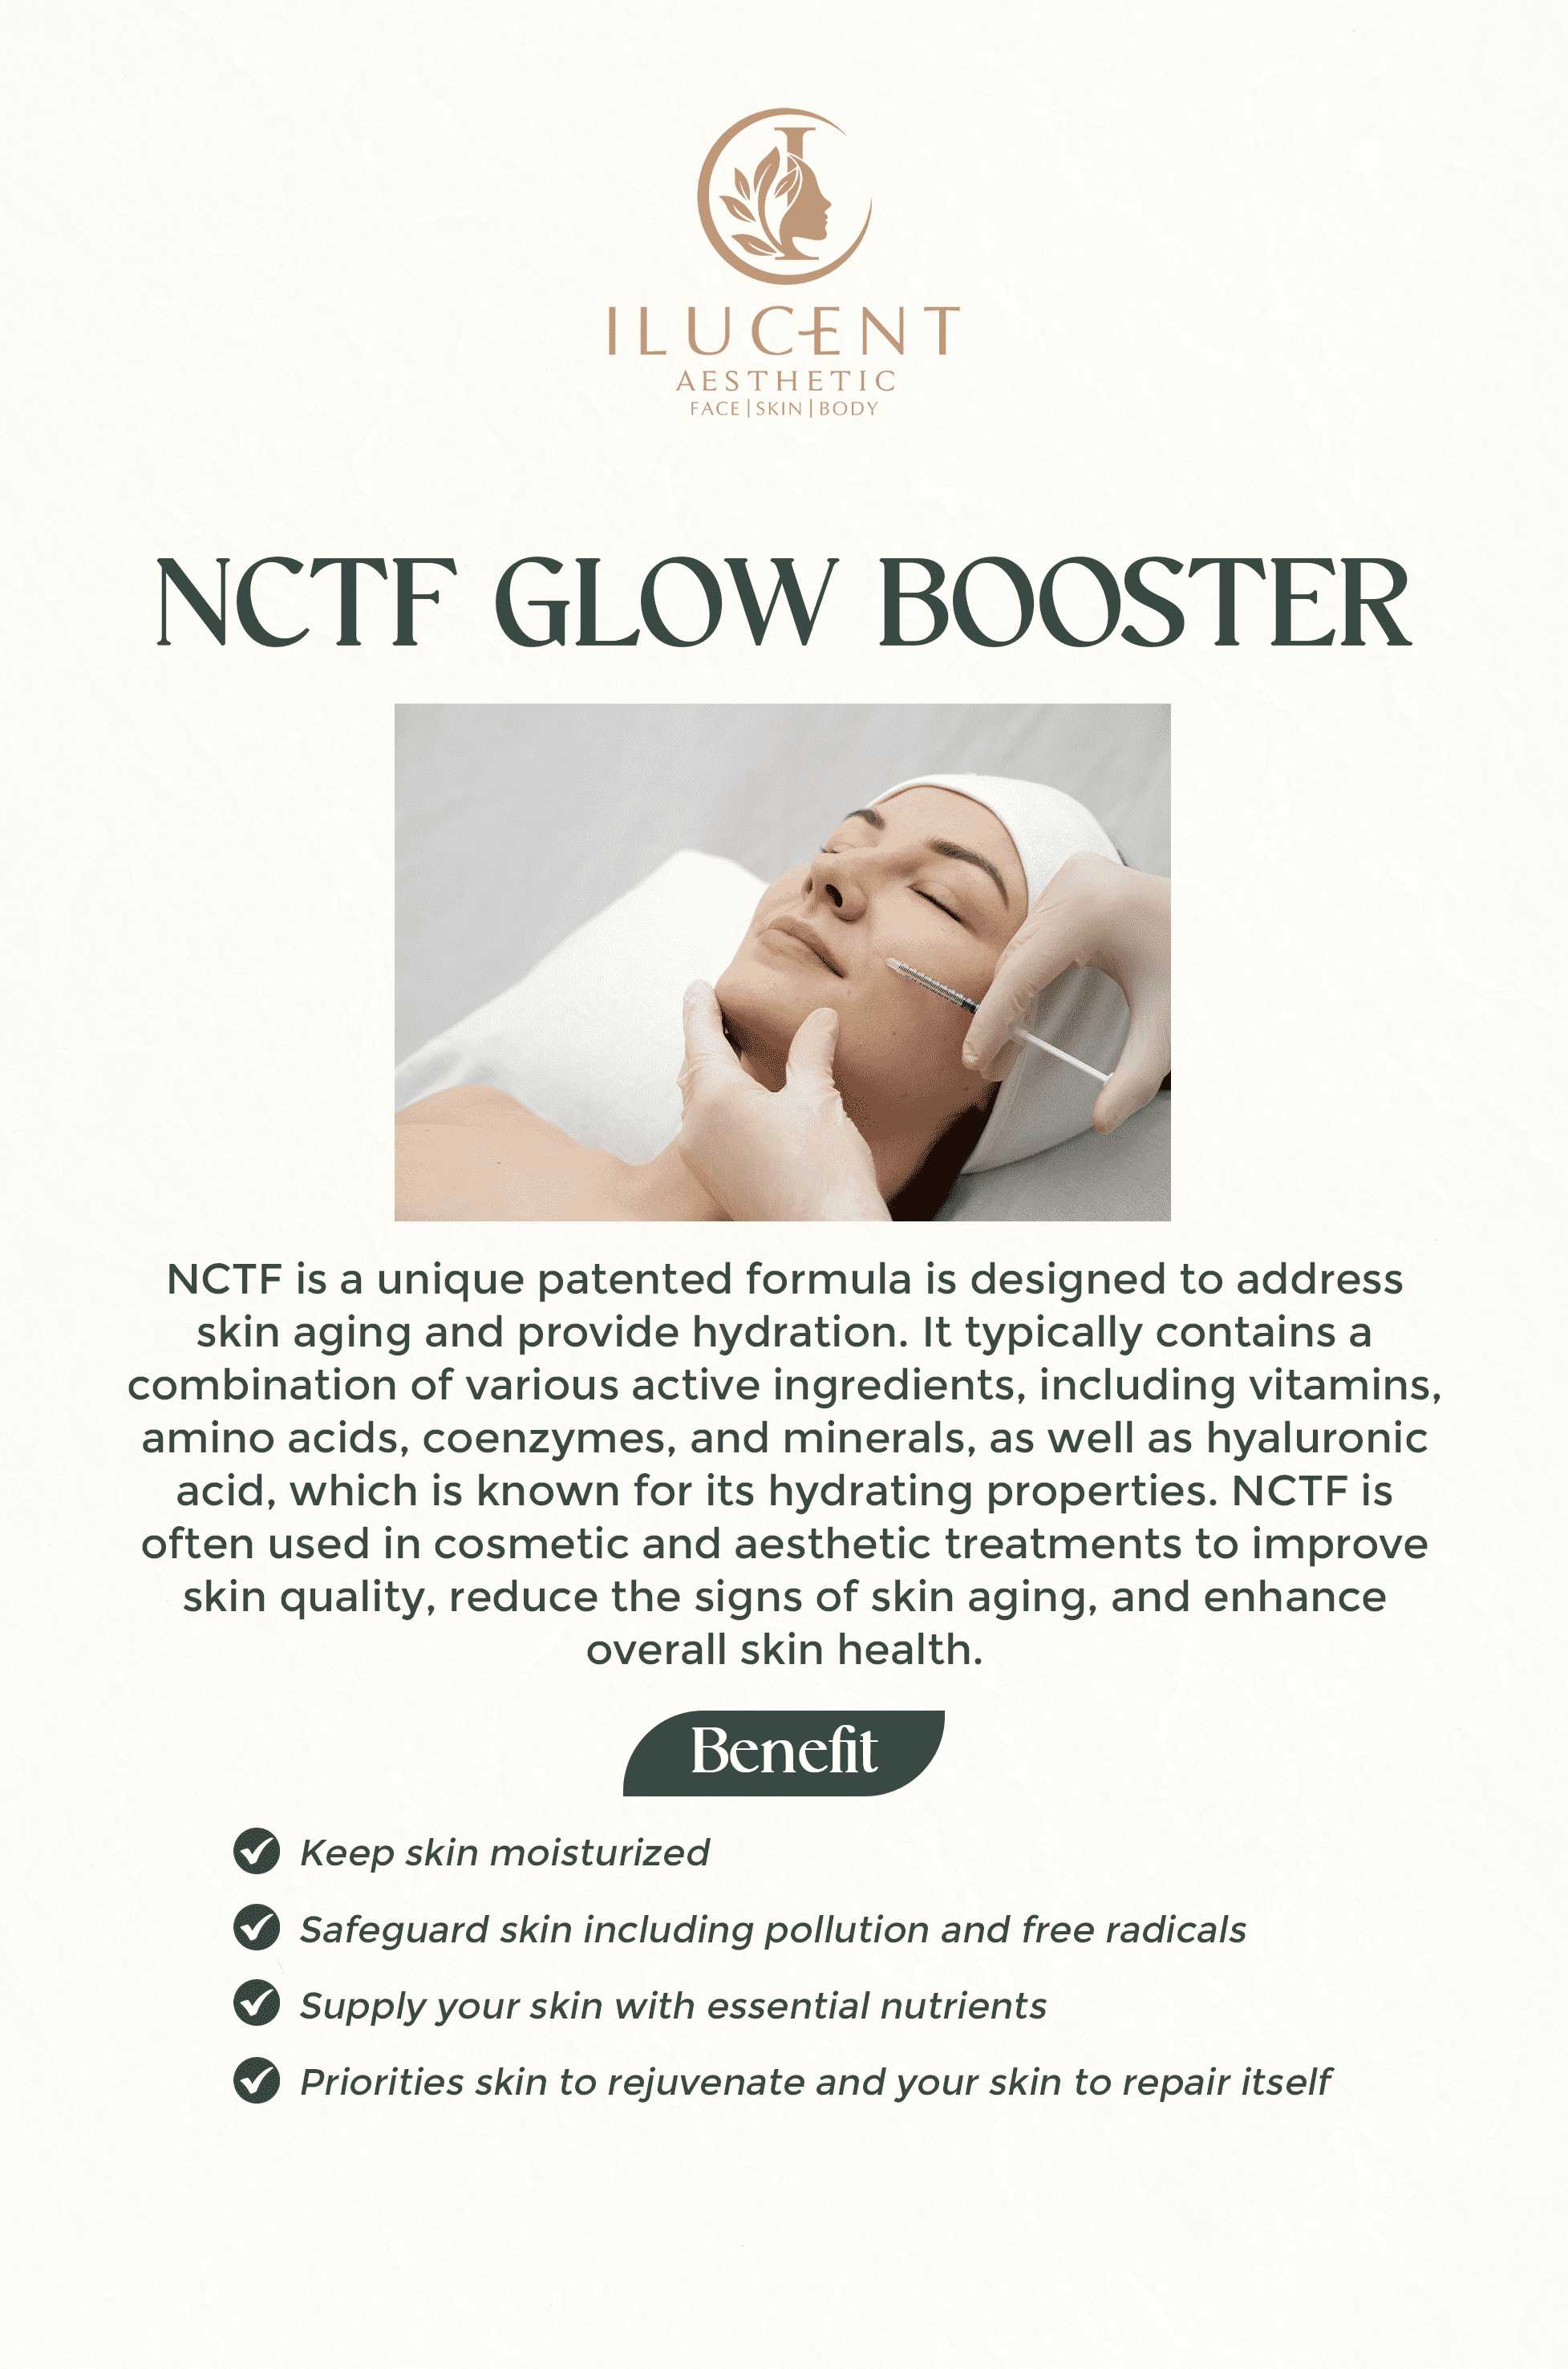 NCTF Glow Booster